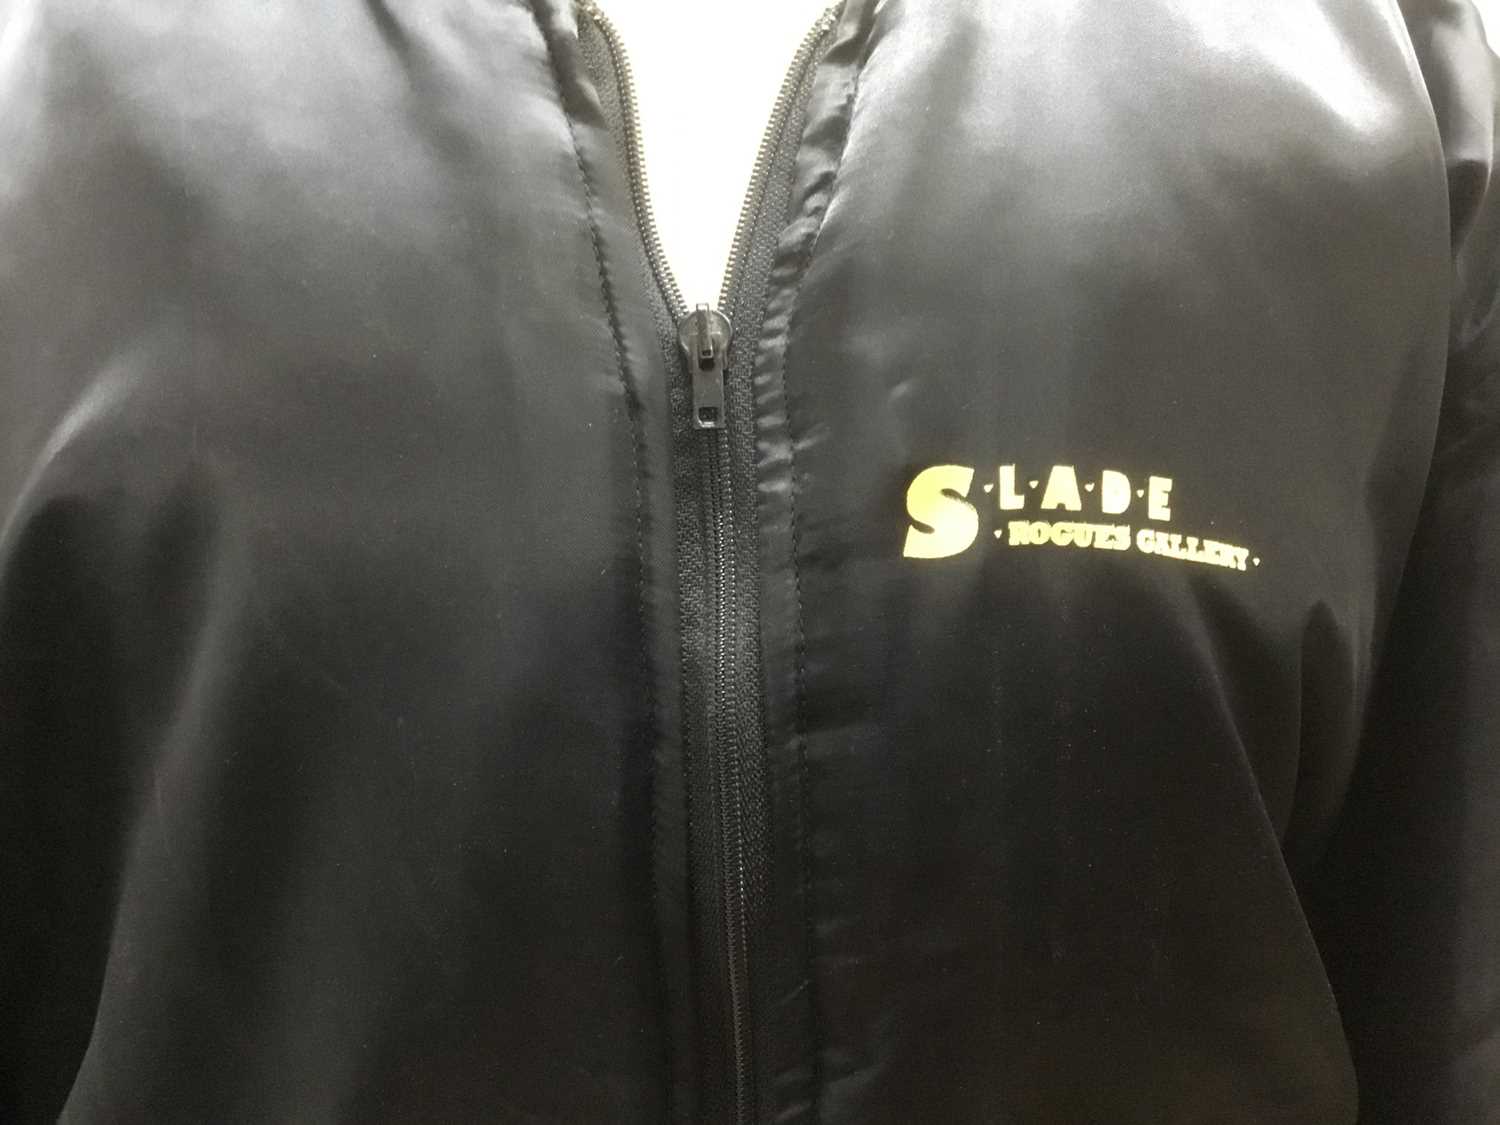 It’s Christmas! - Slade jacket gifted by the band - Image 2 of 7